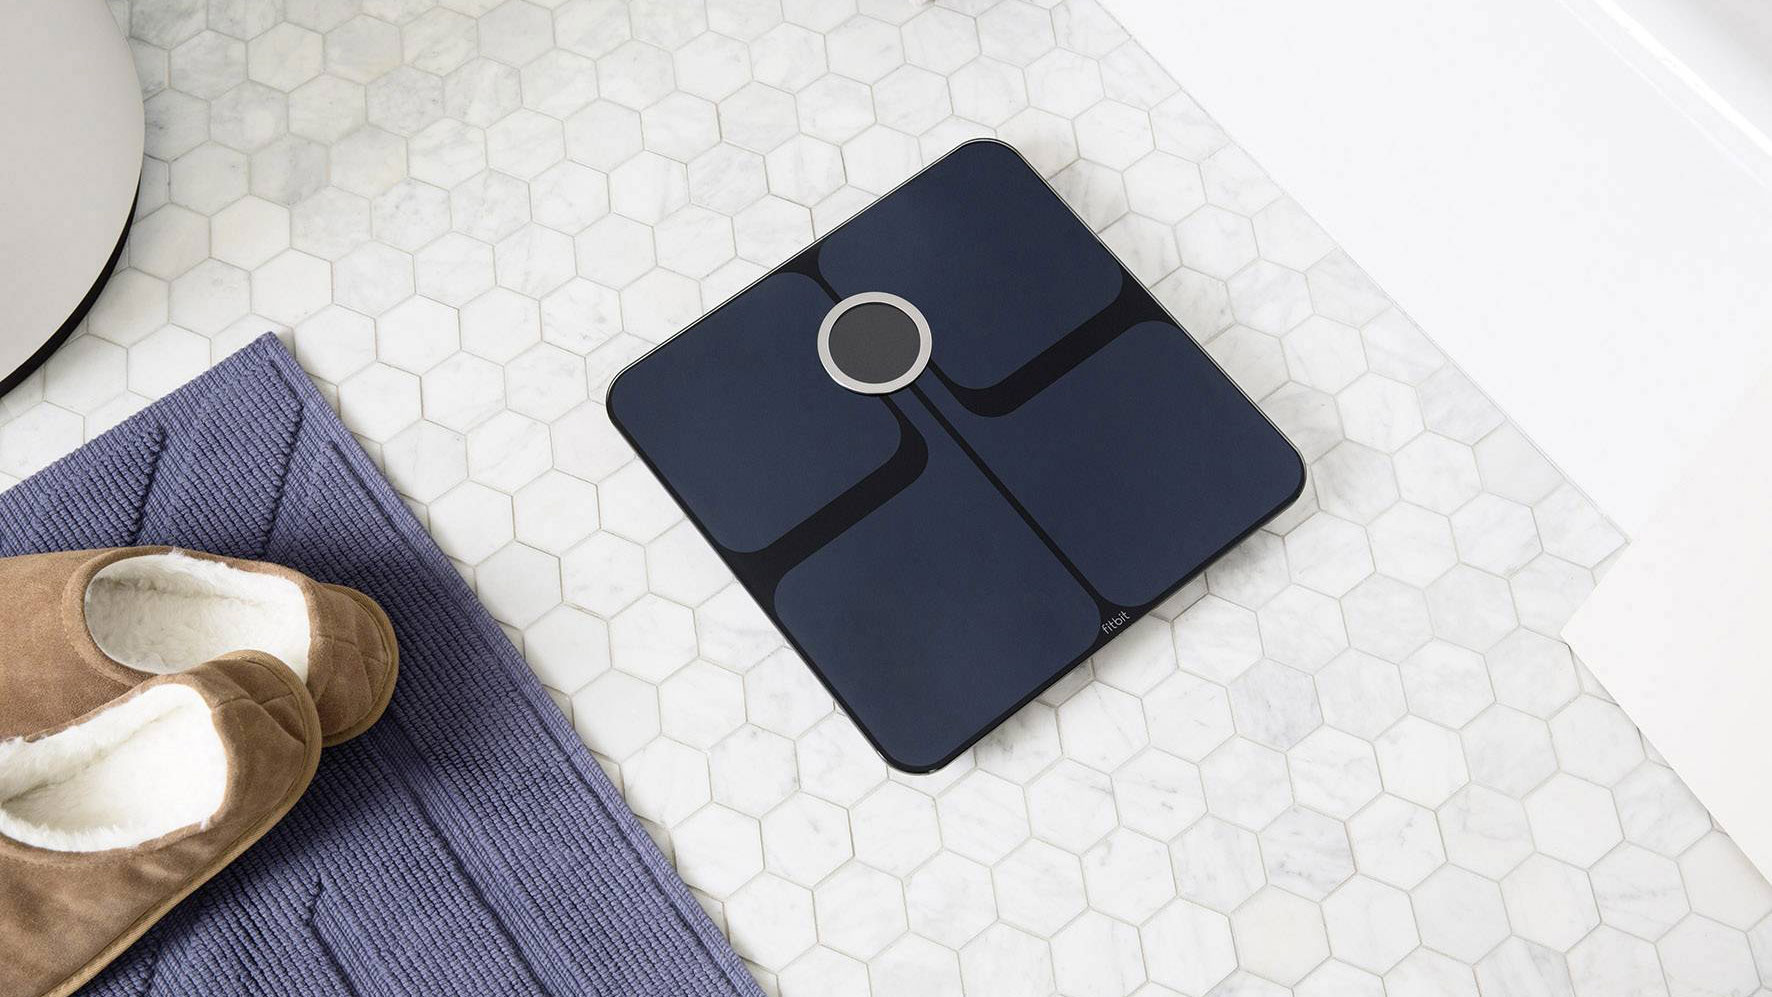 Fitbit Aria 2 review: elegant smart scales that Fitbit users will